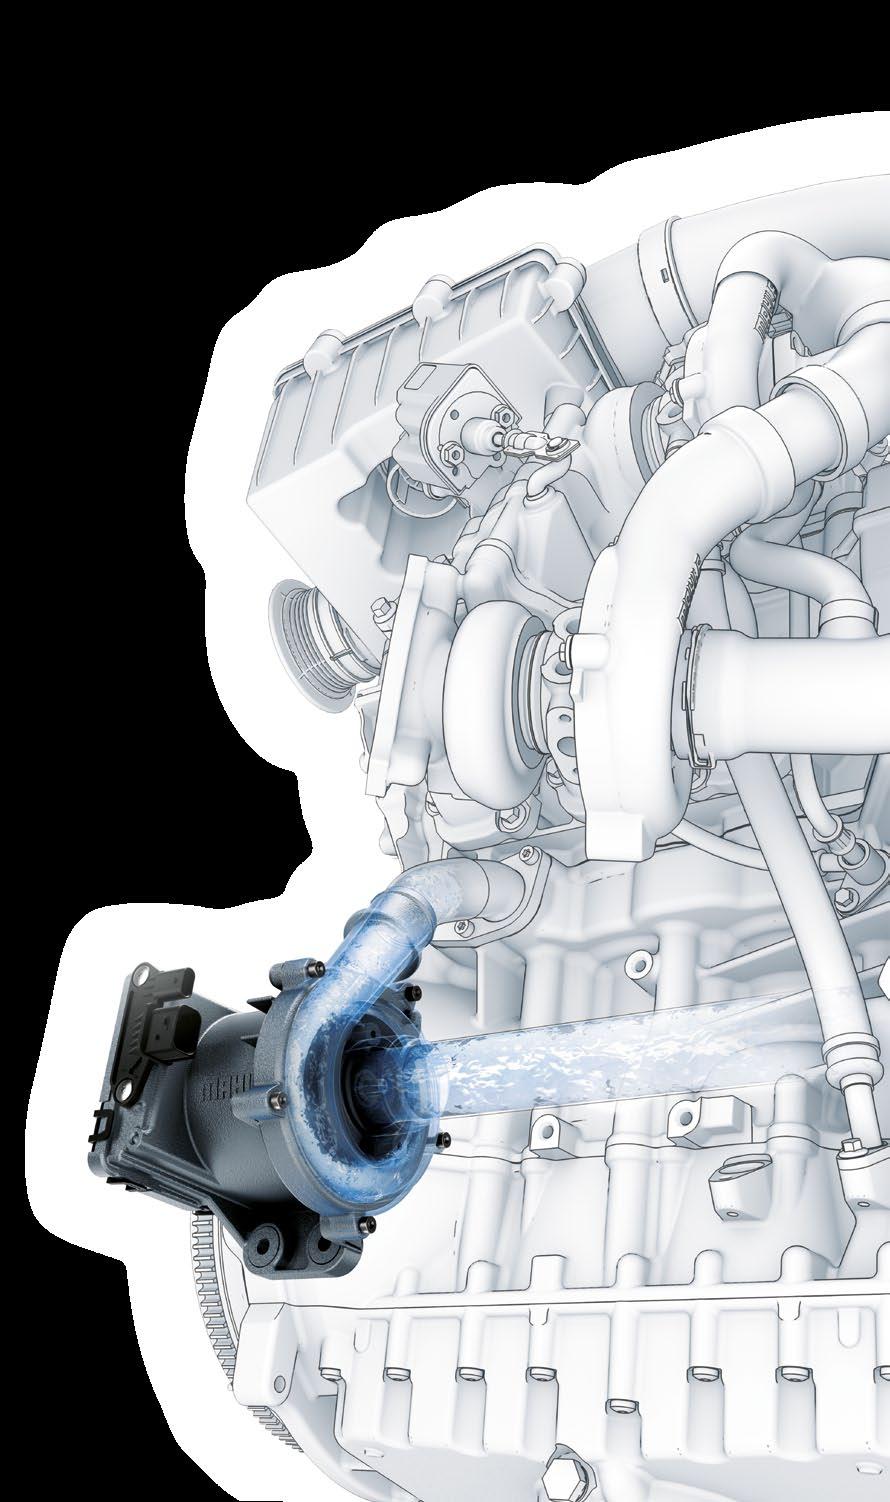 ELECTRICAL 48 V MAIN COOLANT PUMP TO REDUCE CO 2 EMISSIONS Mahle has